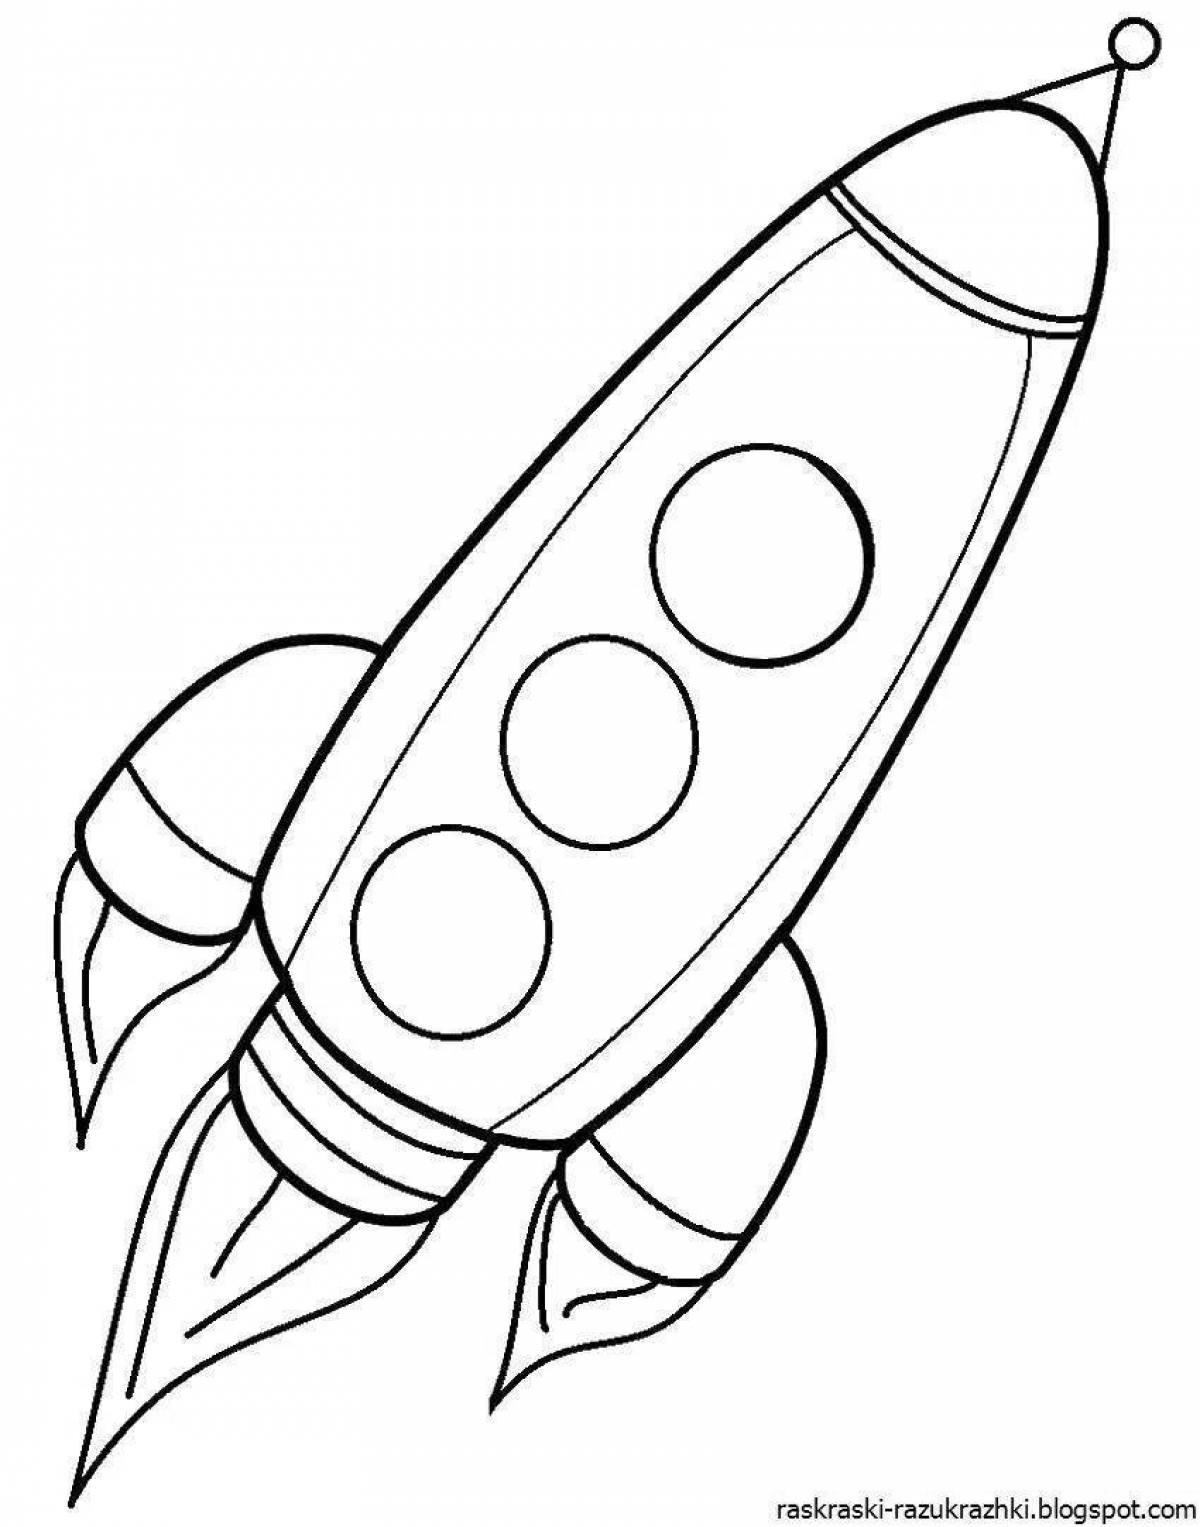 Glorious rocket coloring book for 3-4 year olds